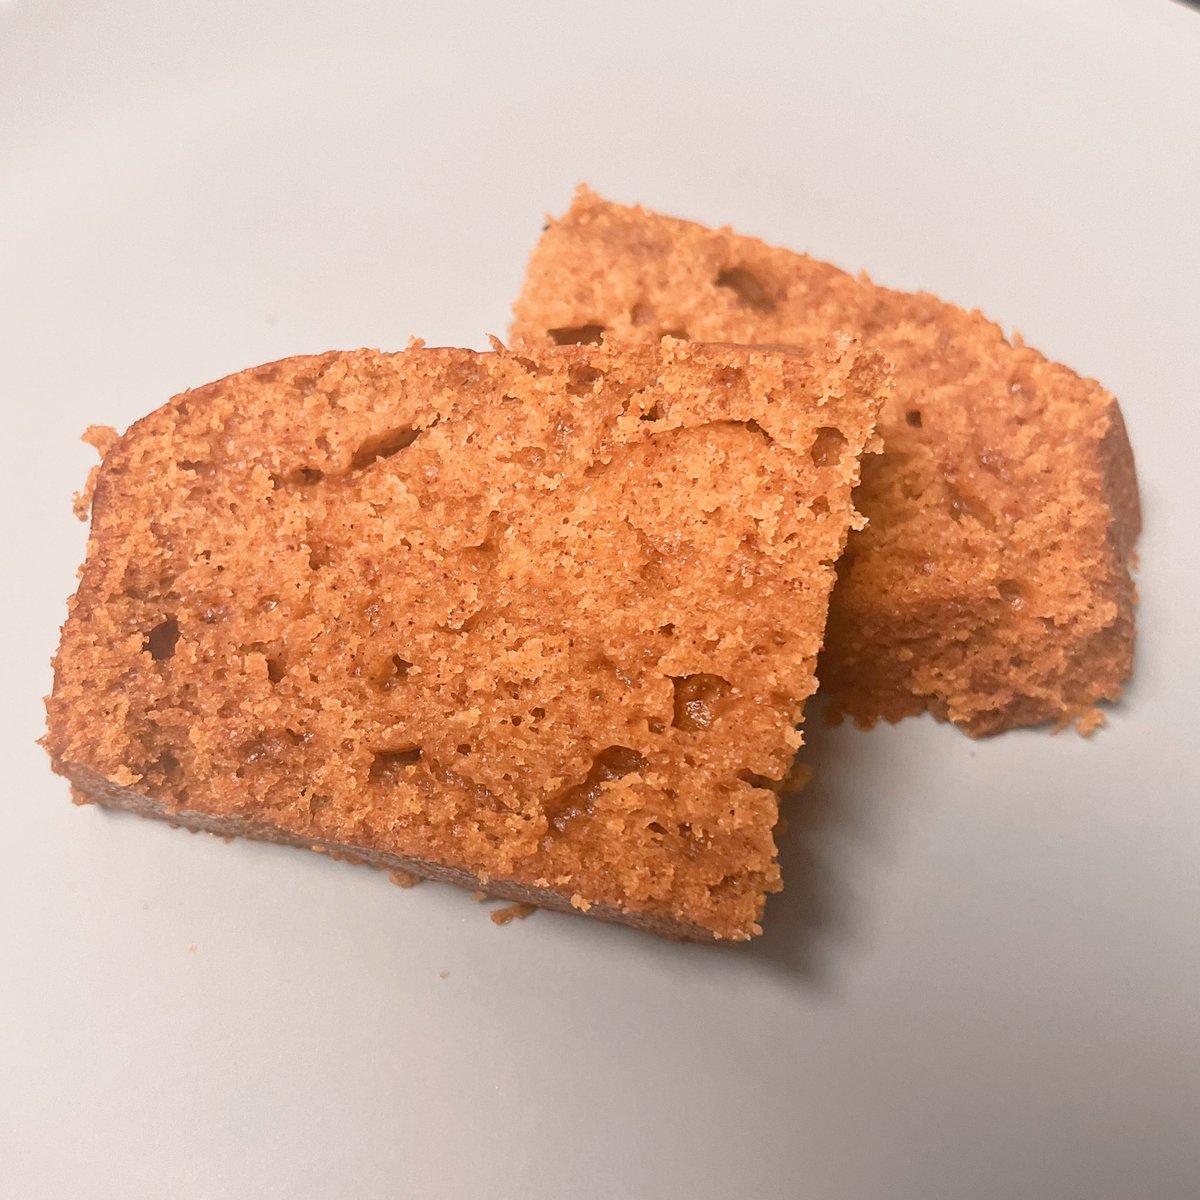 Thanks for coming to the Mario Kart stream with Nick!!! It was my first time playing the game on stream, so I’m surprised I did pretty okay!!

Now I get to enjoy that pumpkin bread I made beforehand hehe~ it turned out great!!